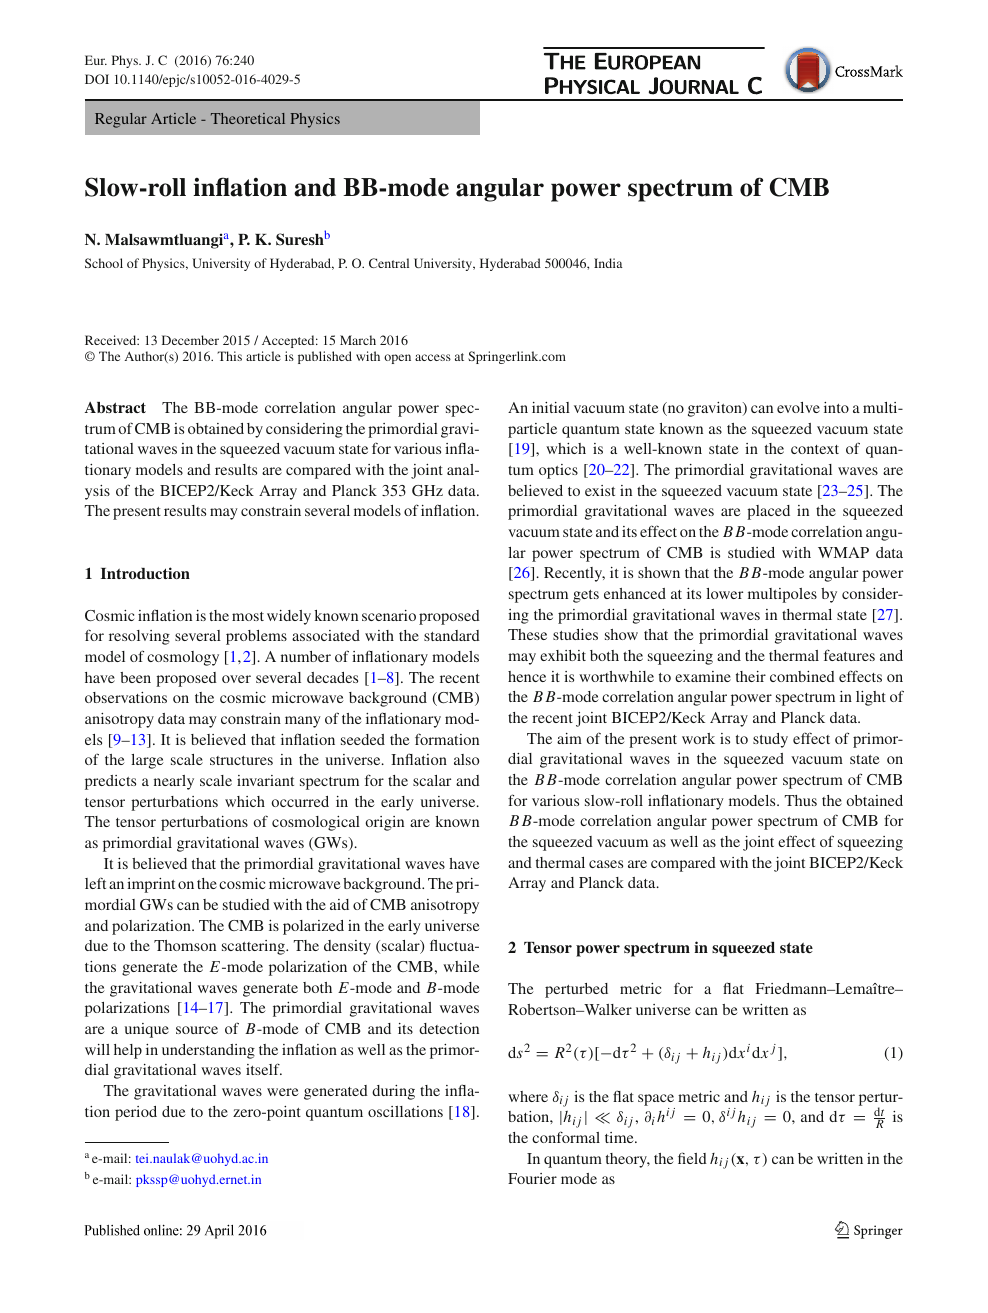 Slow Roll Inflation And Mode Angular Power Spectrum Of Cmb Topic Of Research Paper In Physical Sciences Download Scholarly Article Pdf And Read For Free On Cyberleninka Open Science Hub